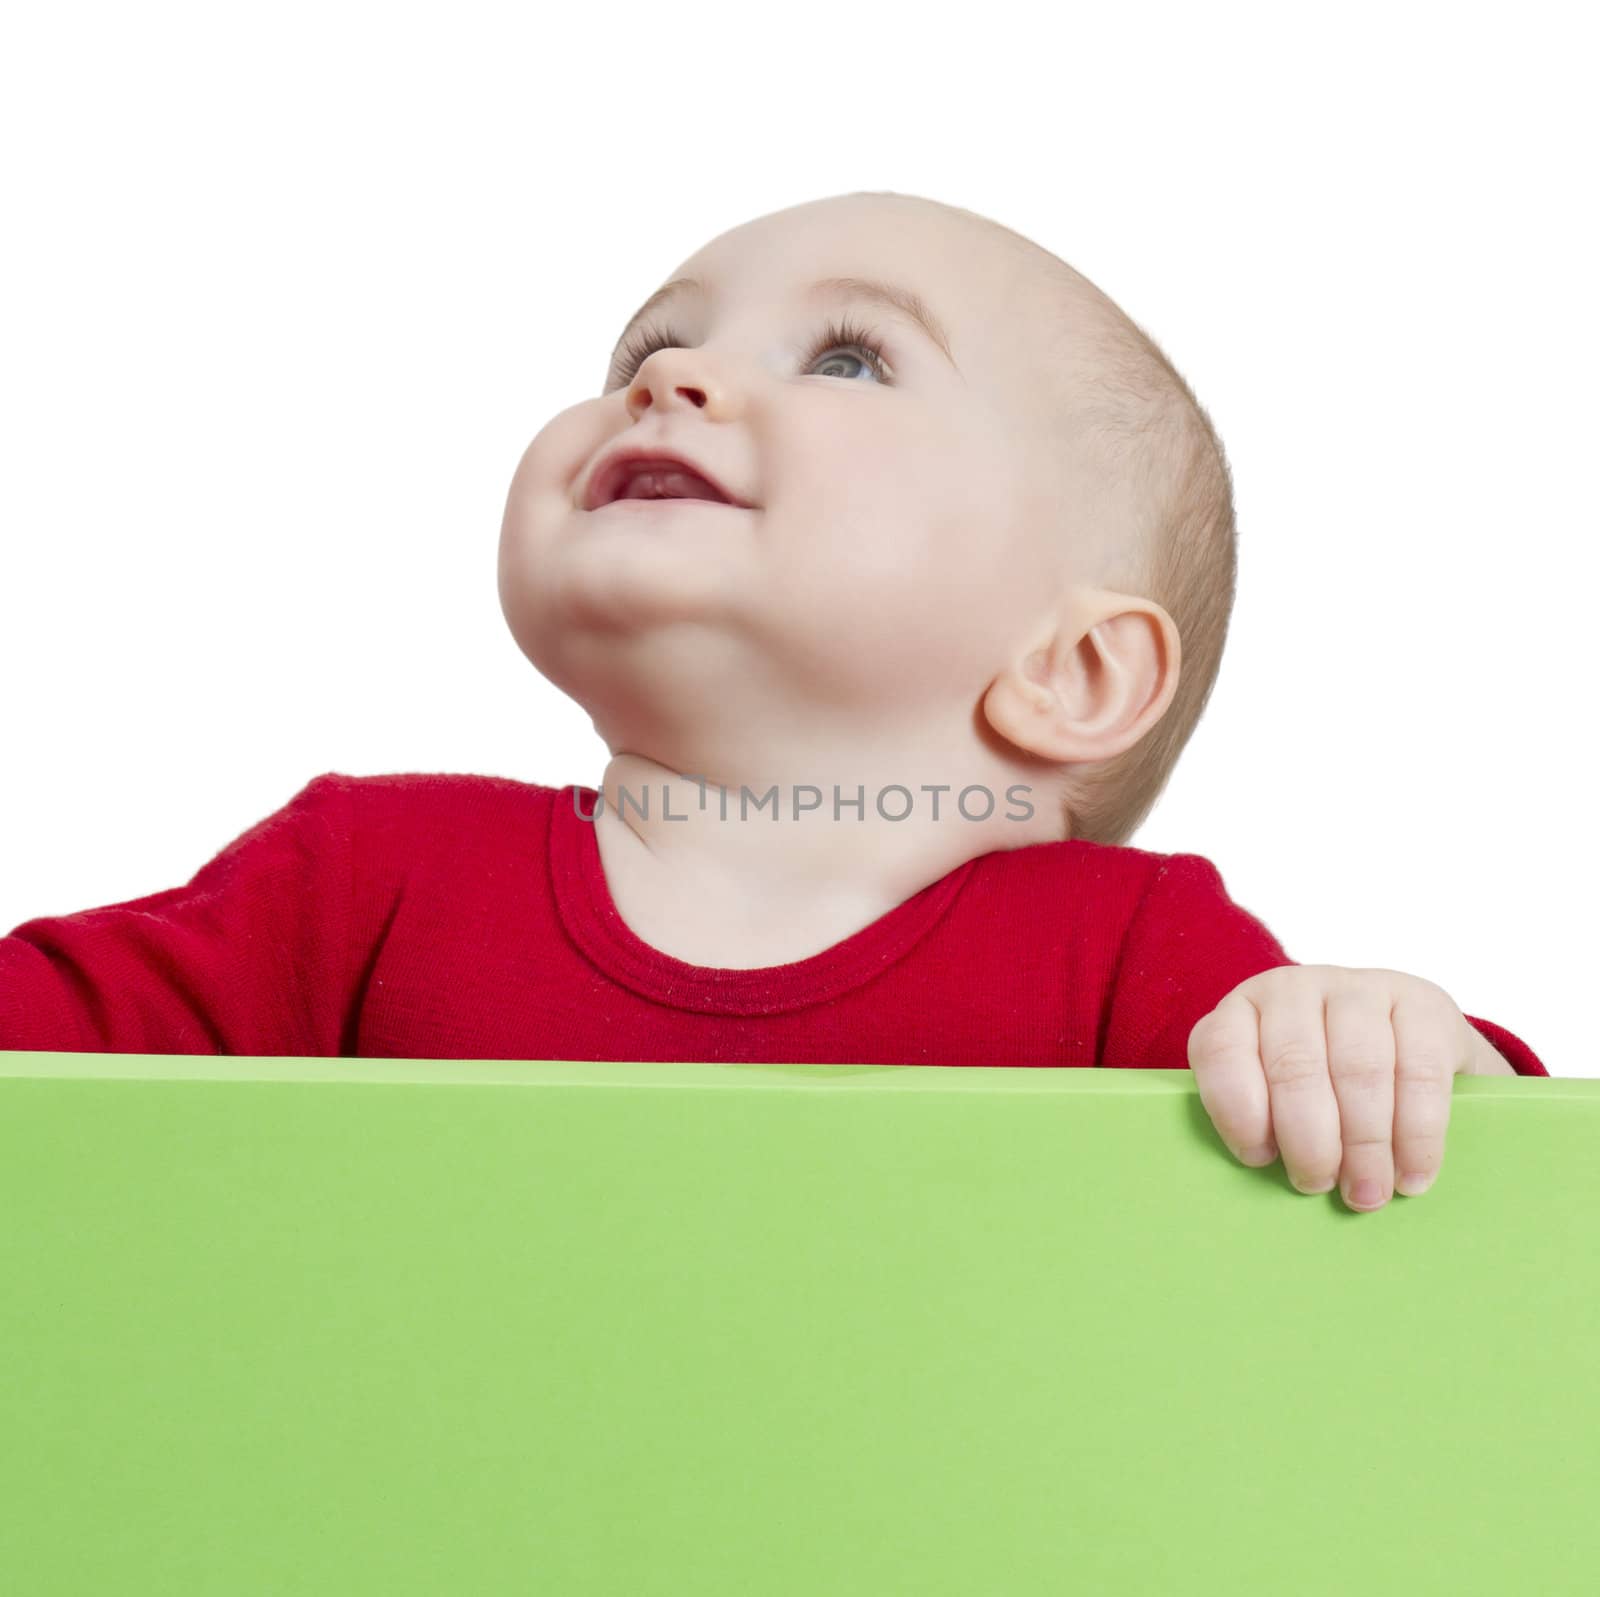 young child holding shield. isolate on white background